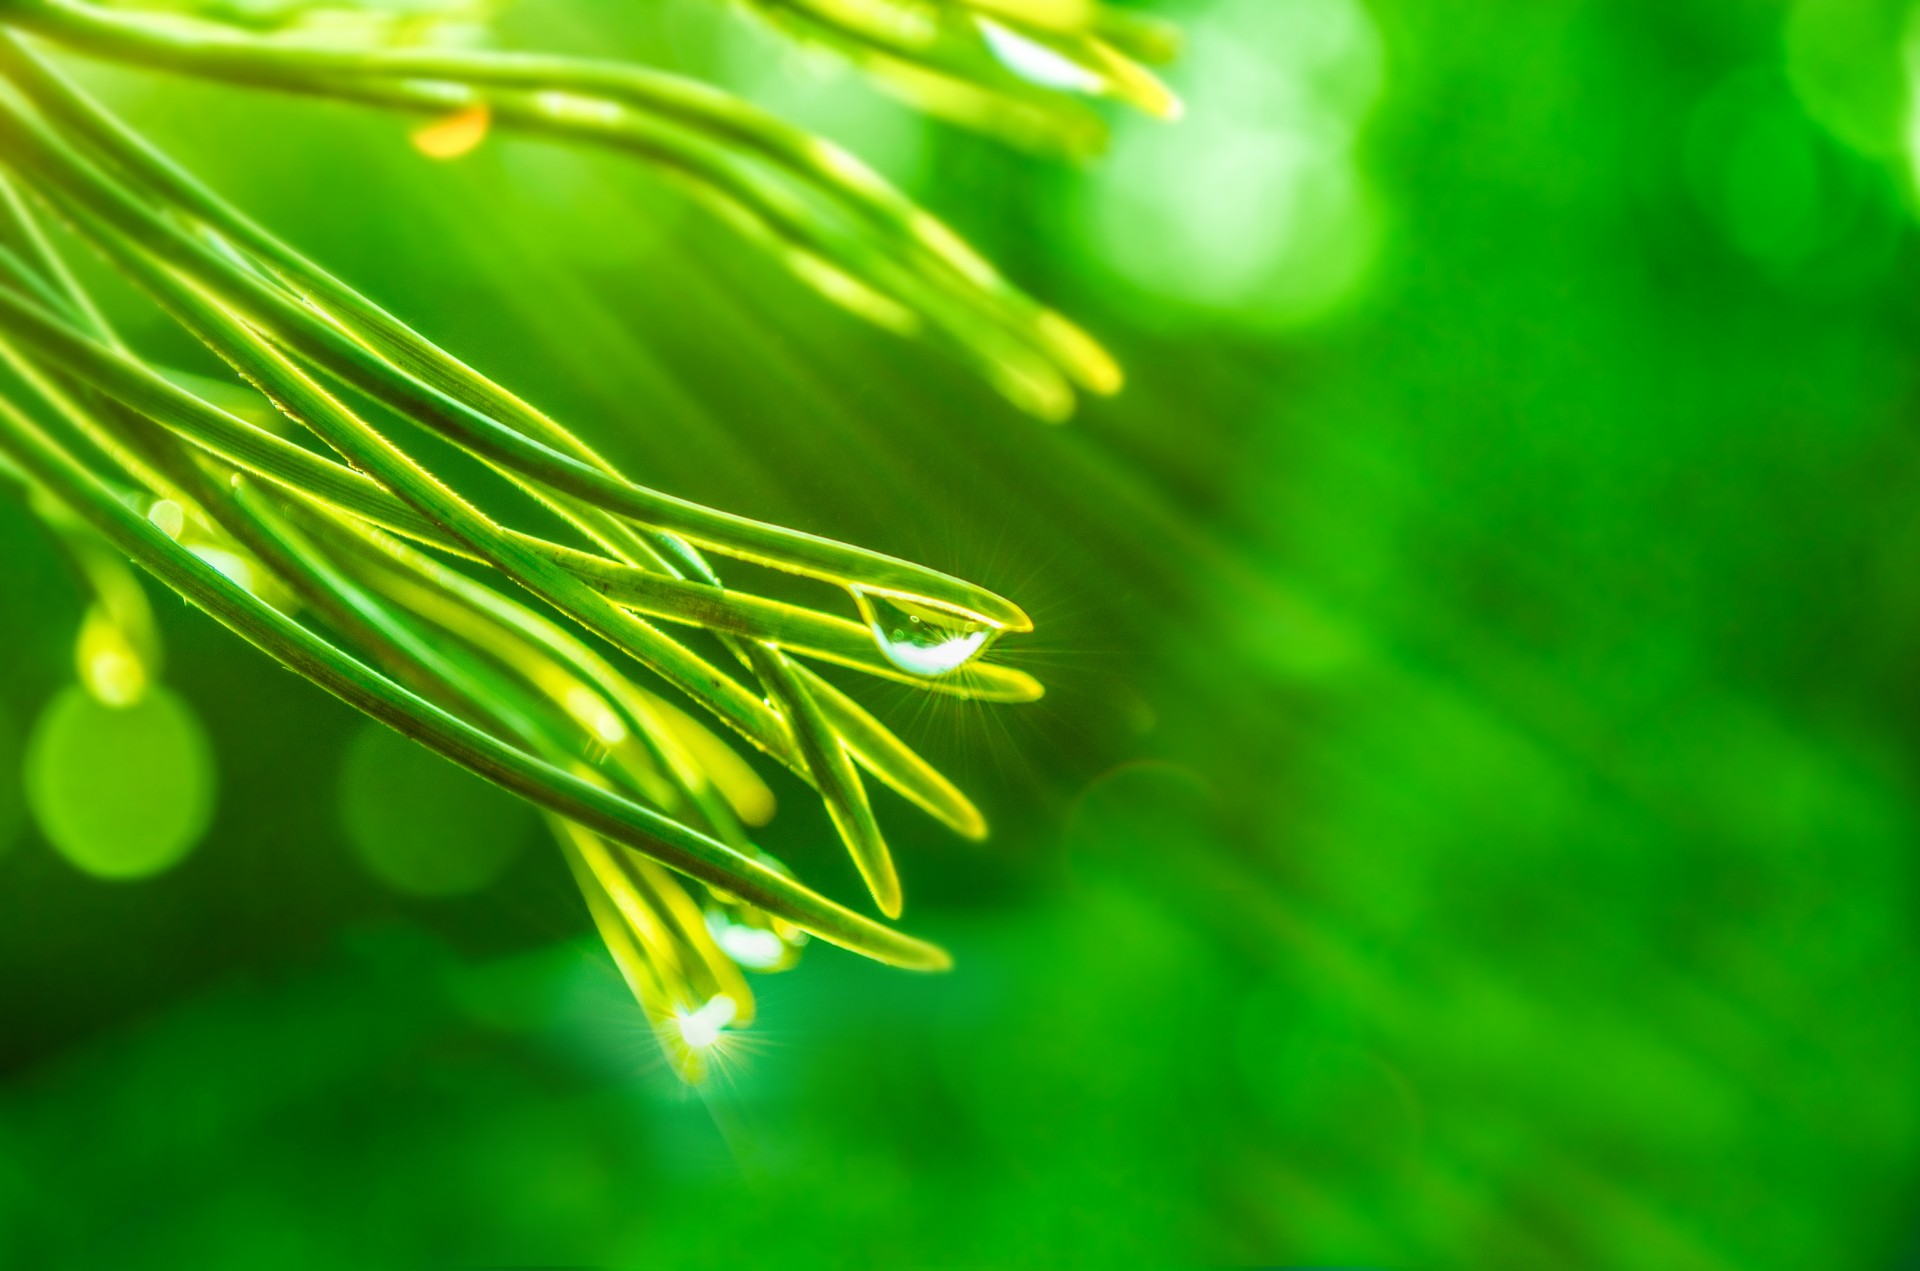 Green Branches With Water Drops